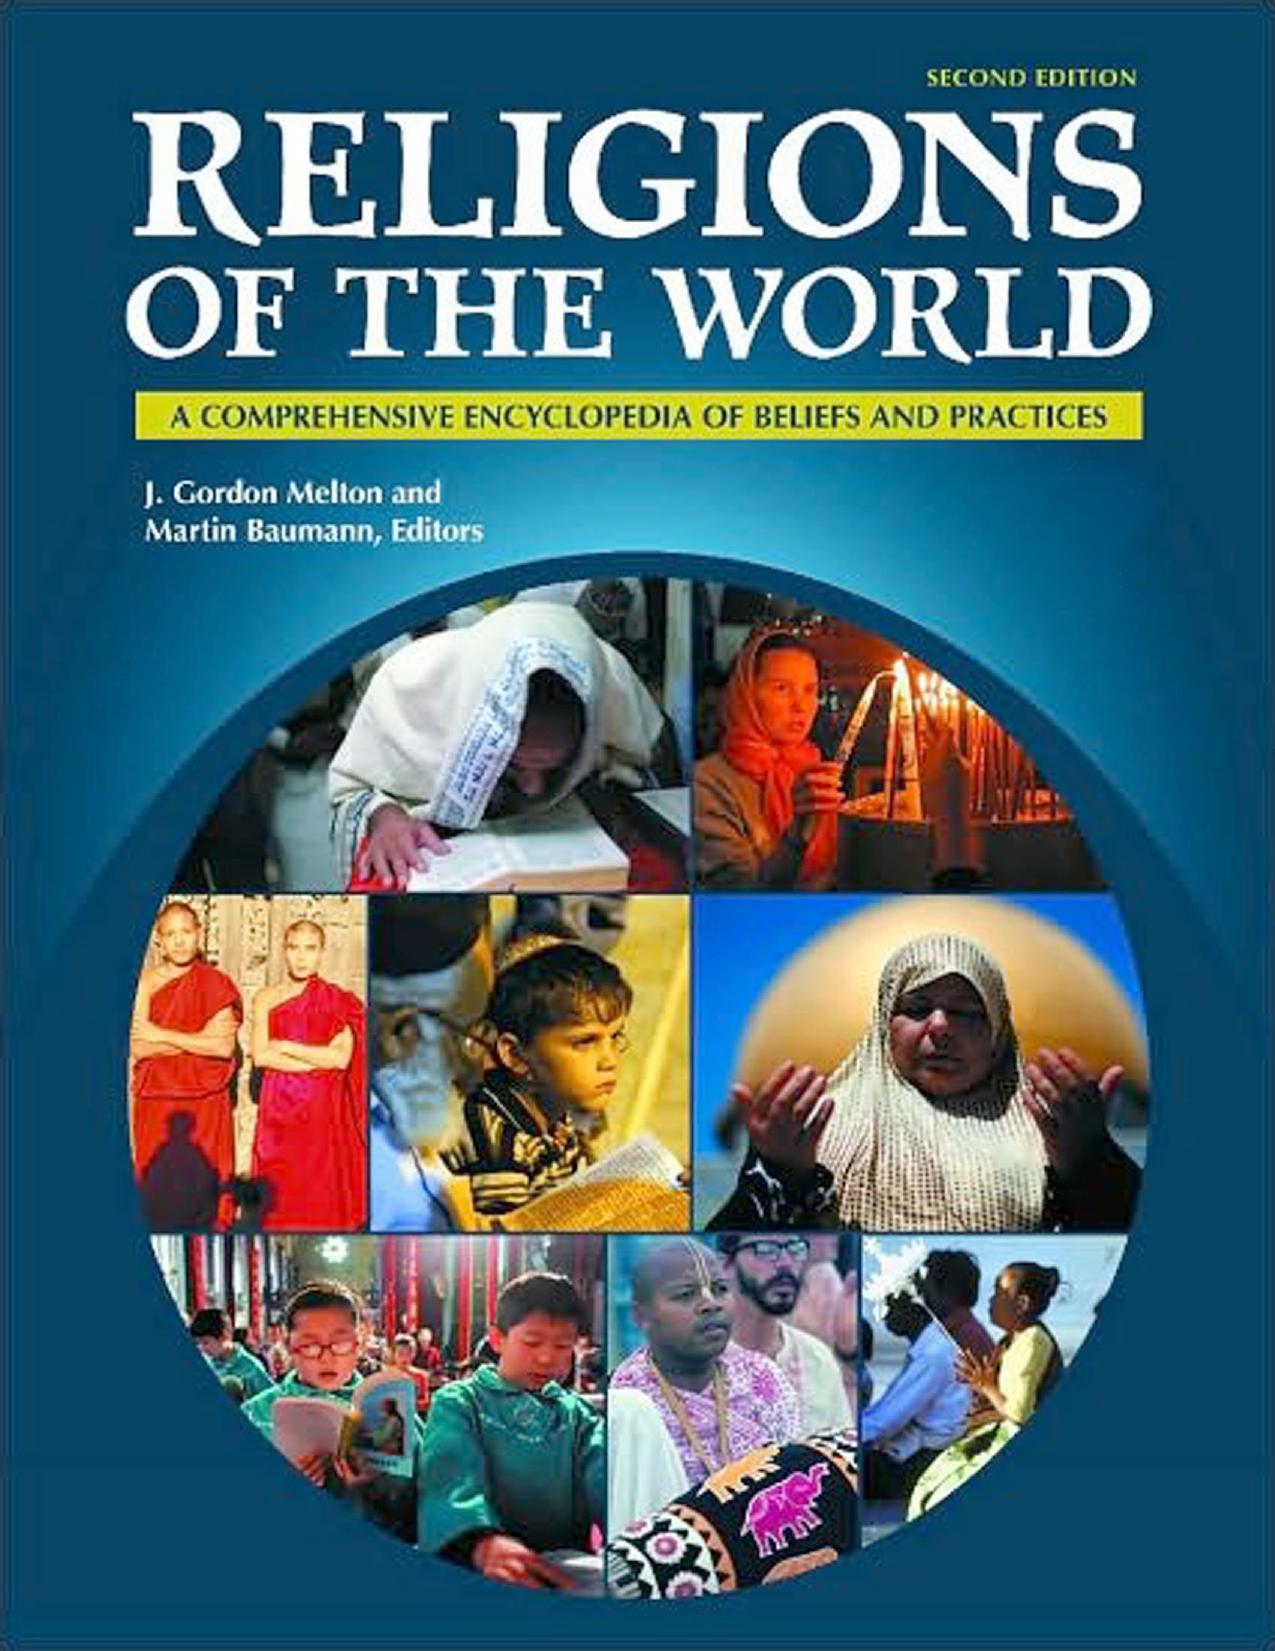 Religions of the world A comprehensive encyclopedia of beliefs and practices 2010